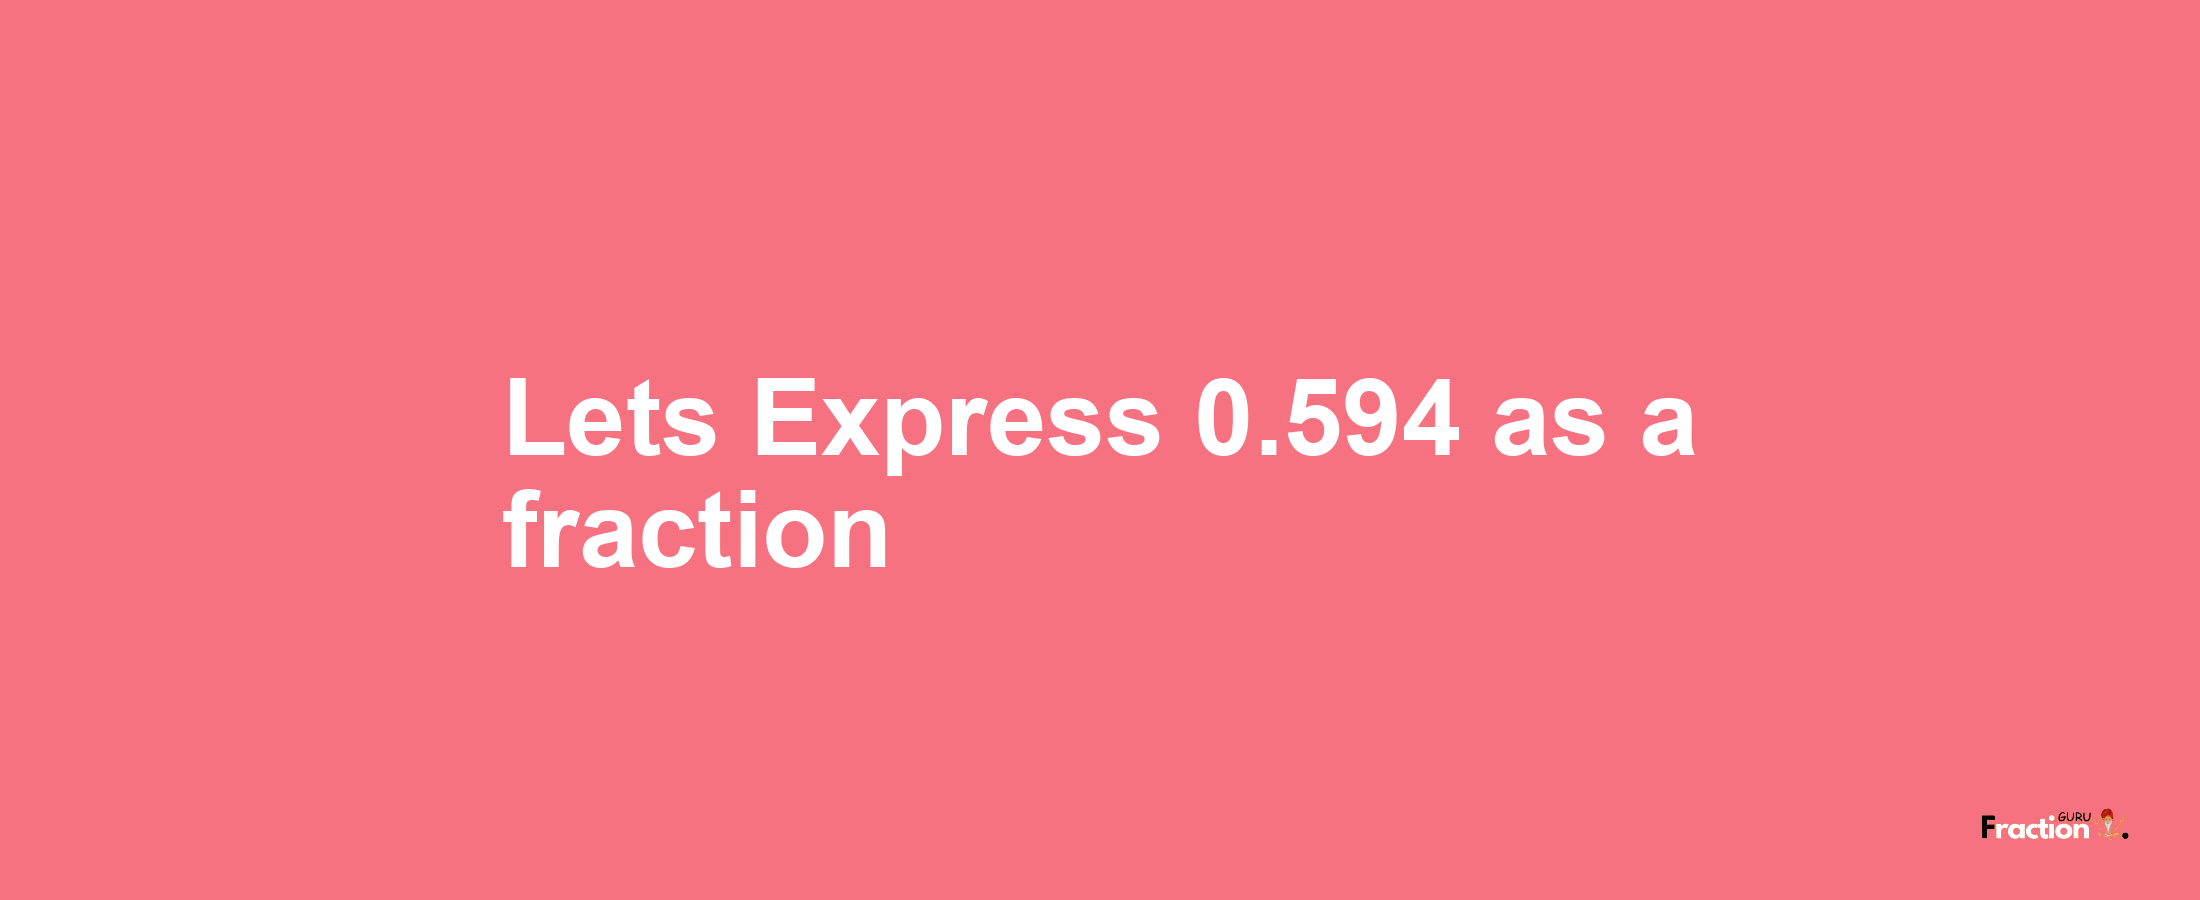 Lets Express 0.594 as afraction